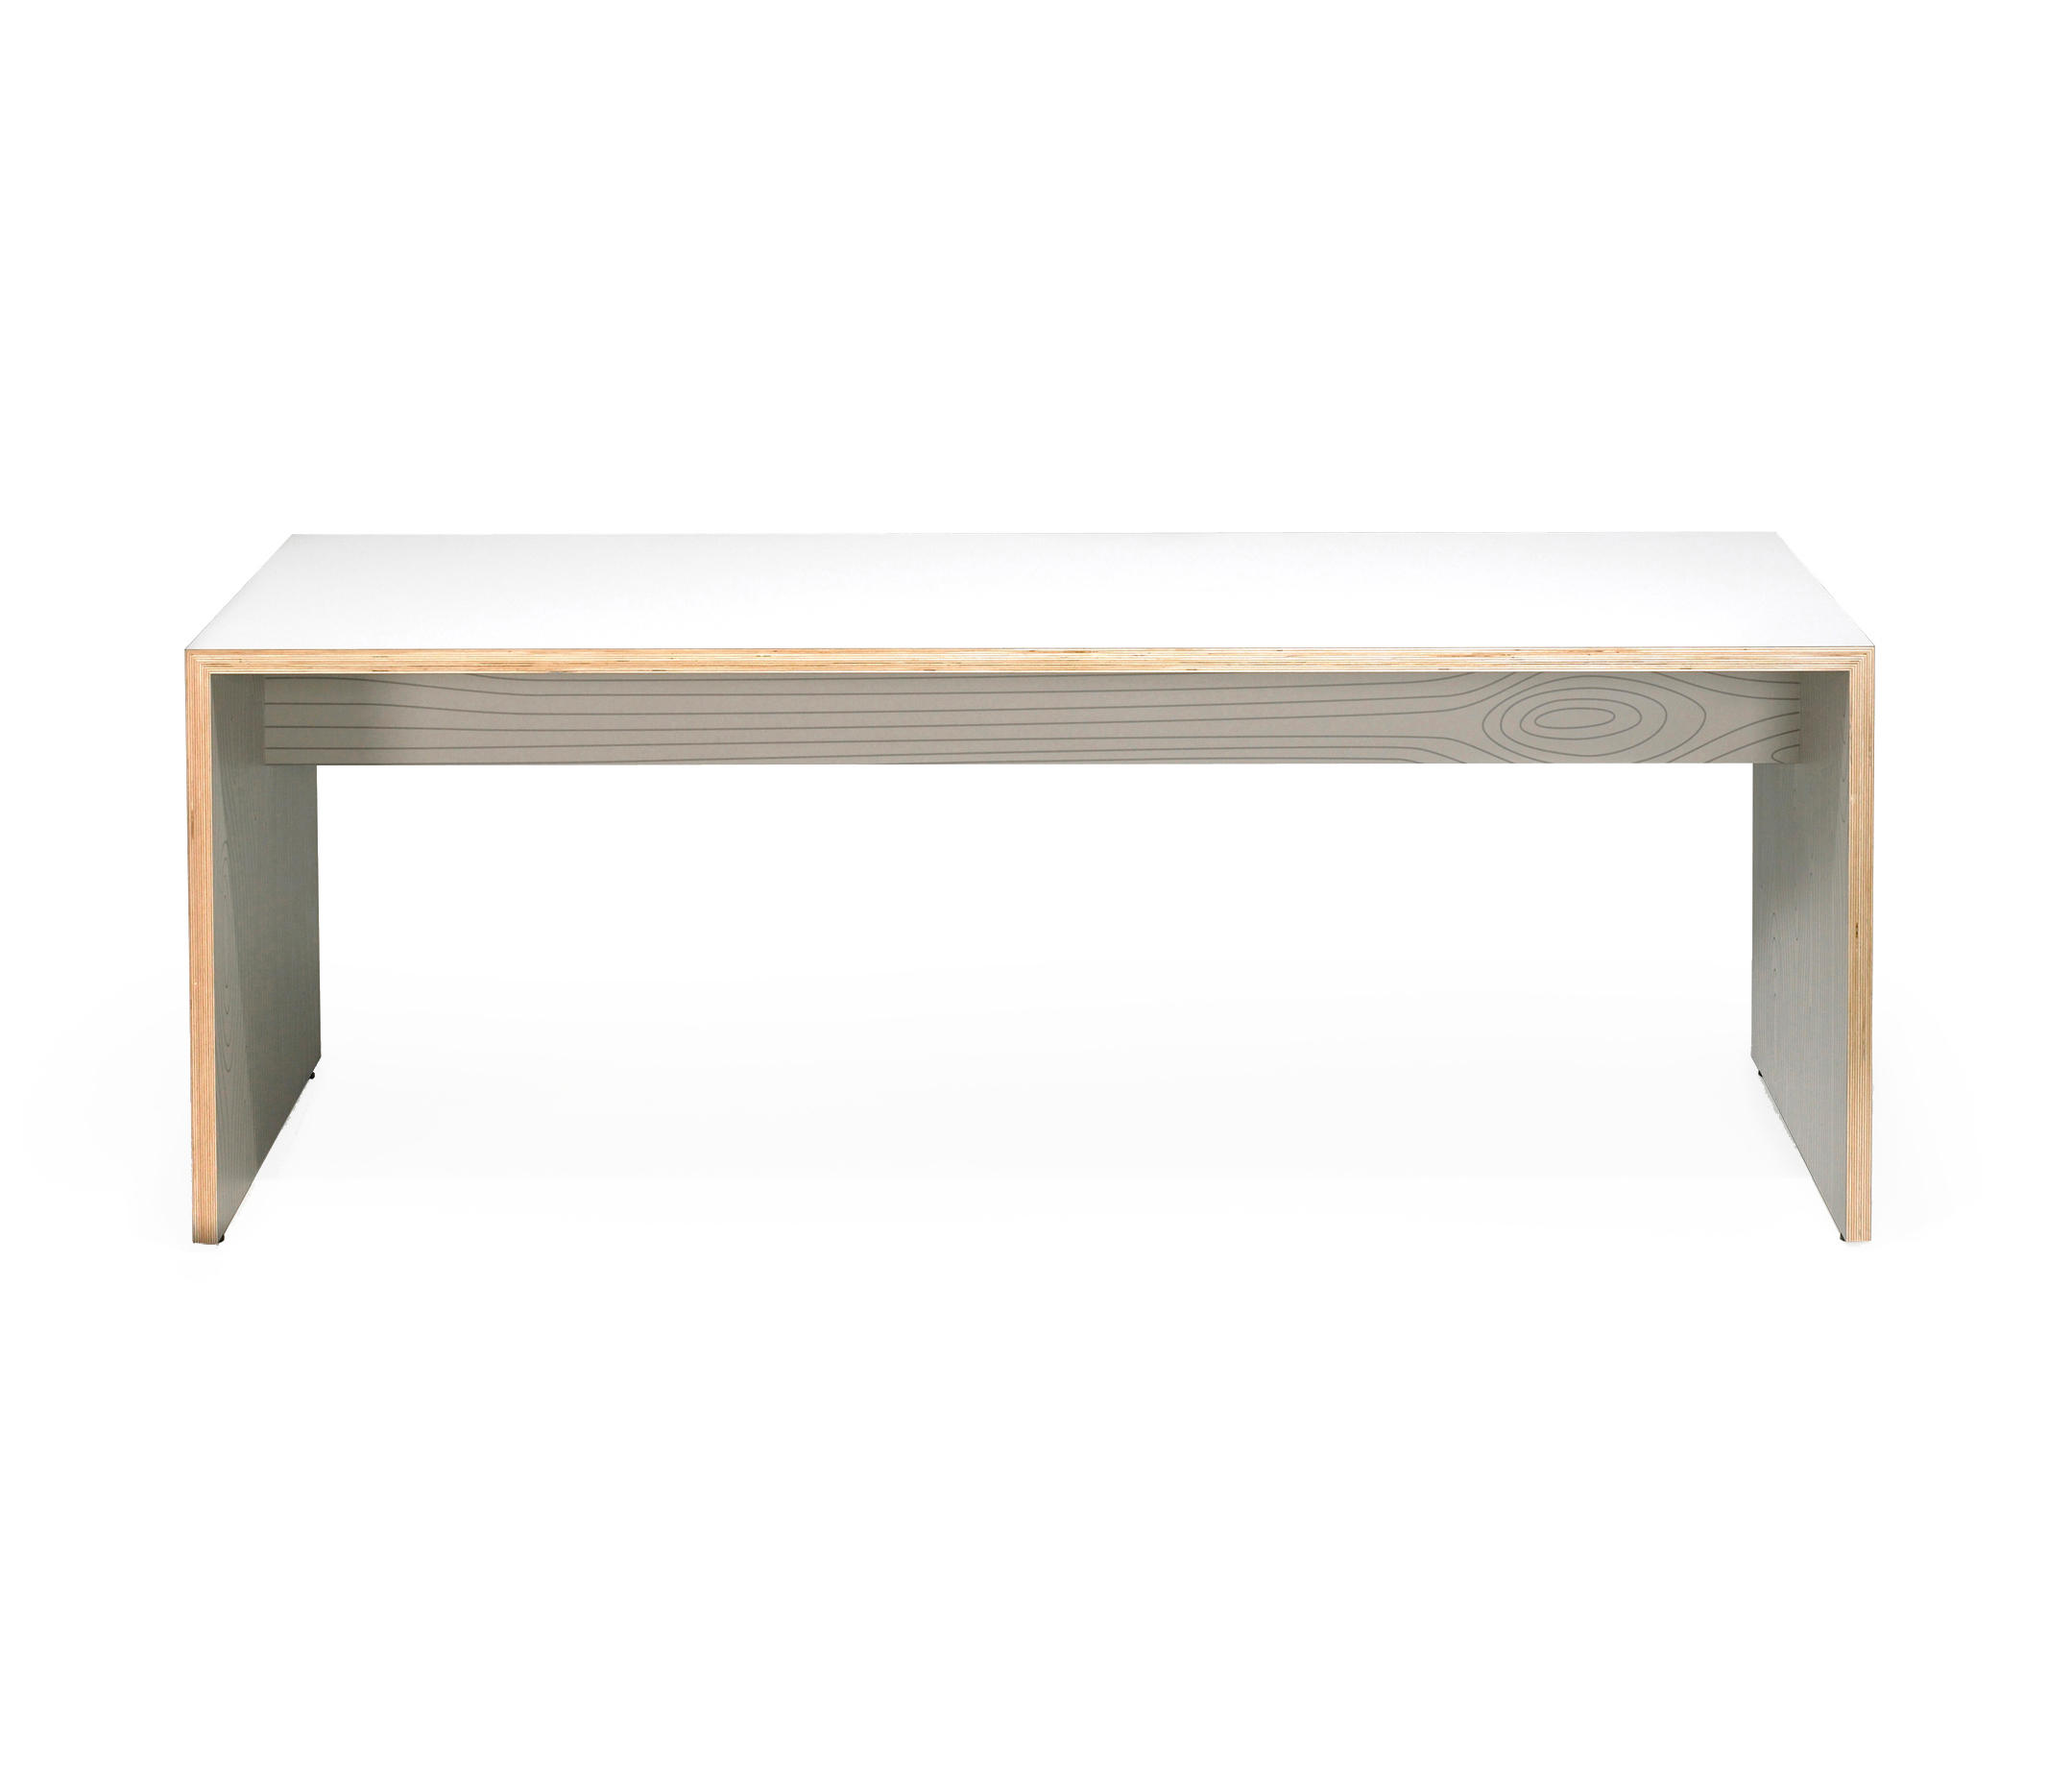 CHEEK - Contract tables from Lande | Architonic